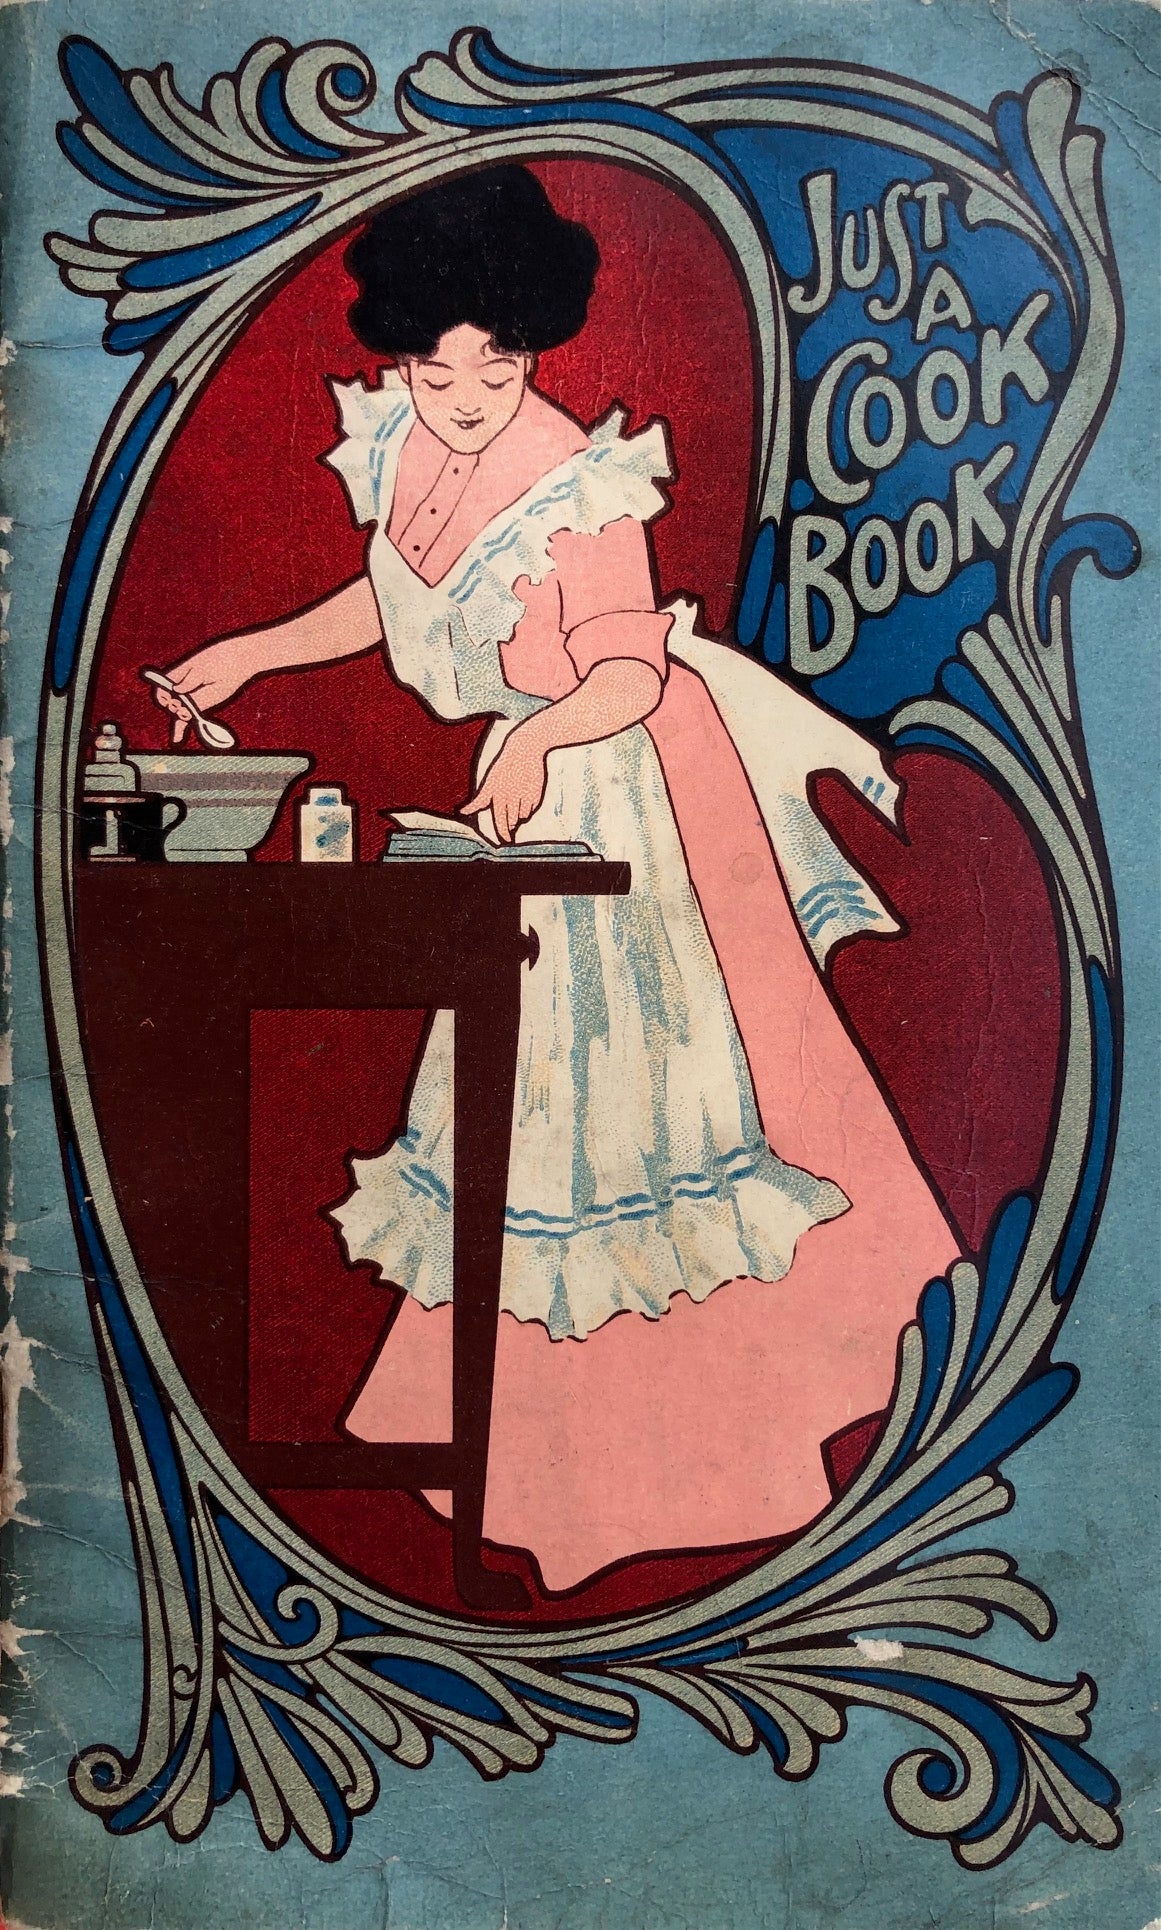 (Booklet) George M. Clark & Co. Just a Cook Book